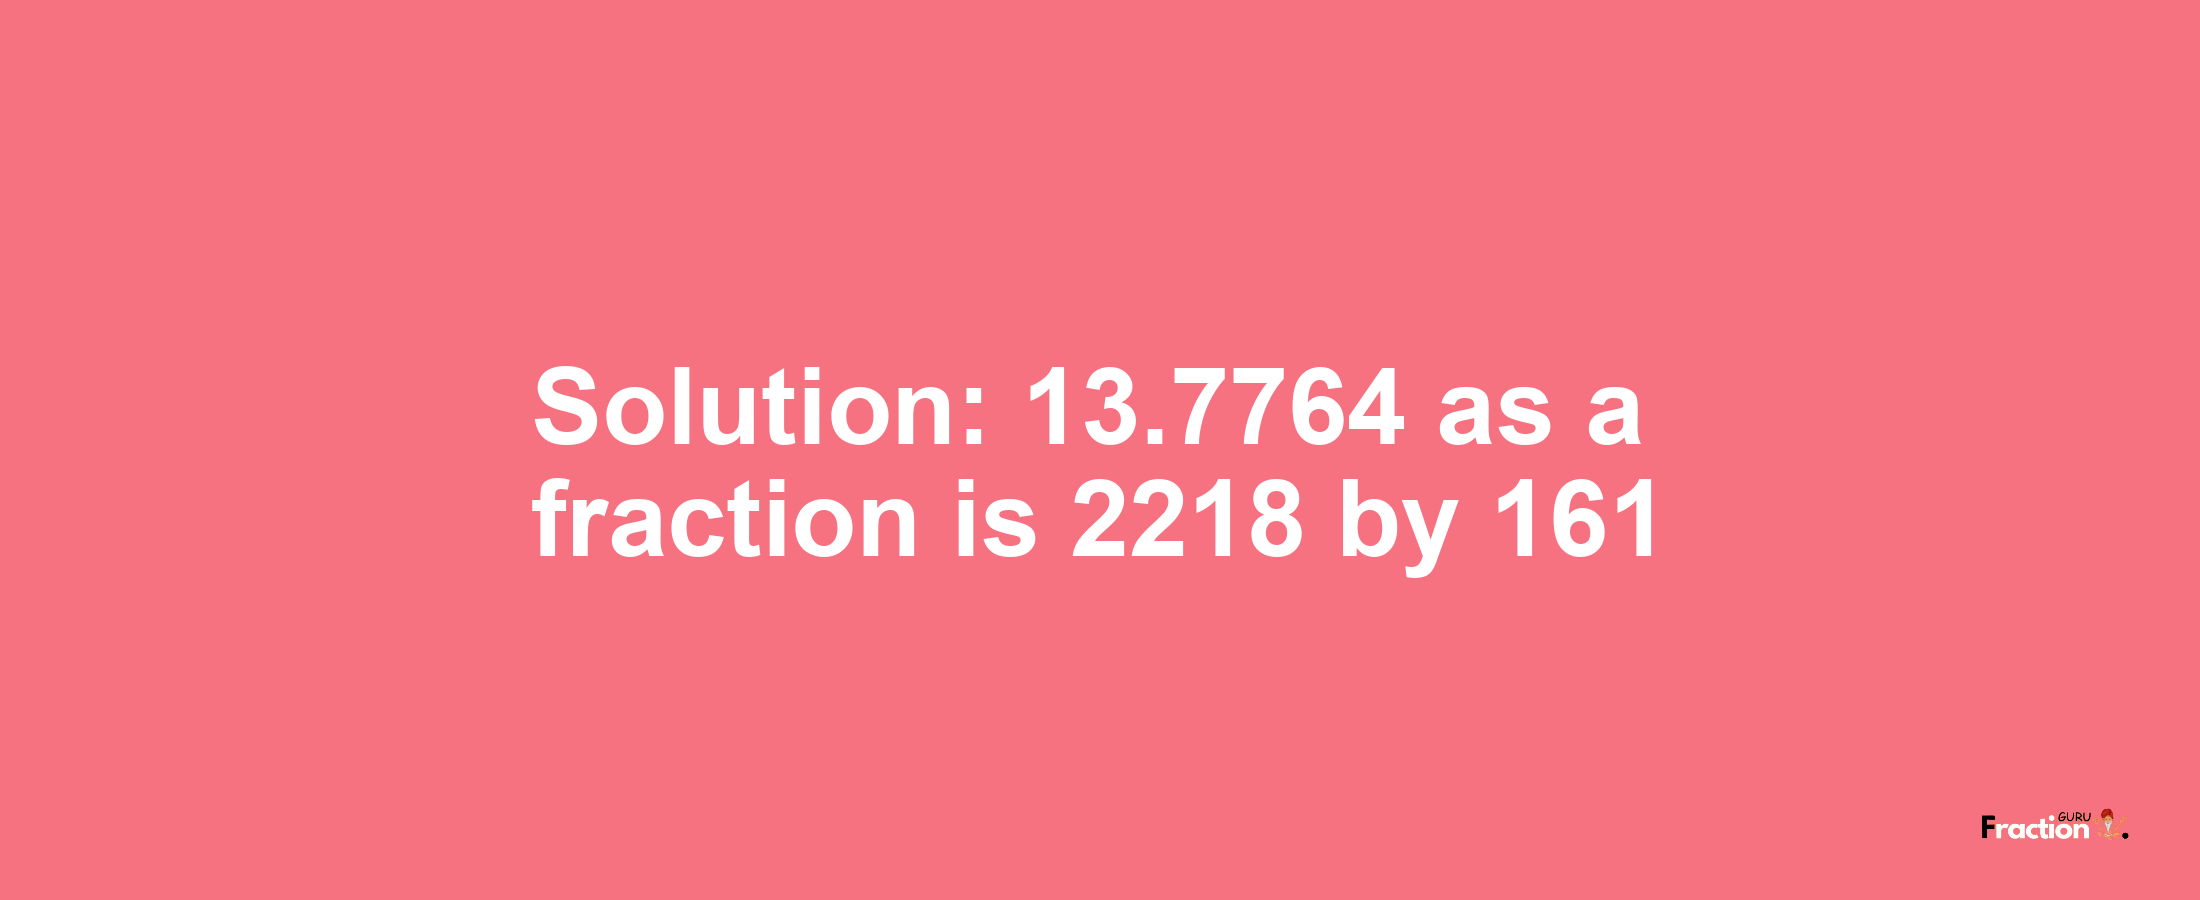 Solution:13.7764 as a fraction is 2218/161